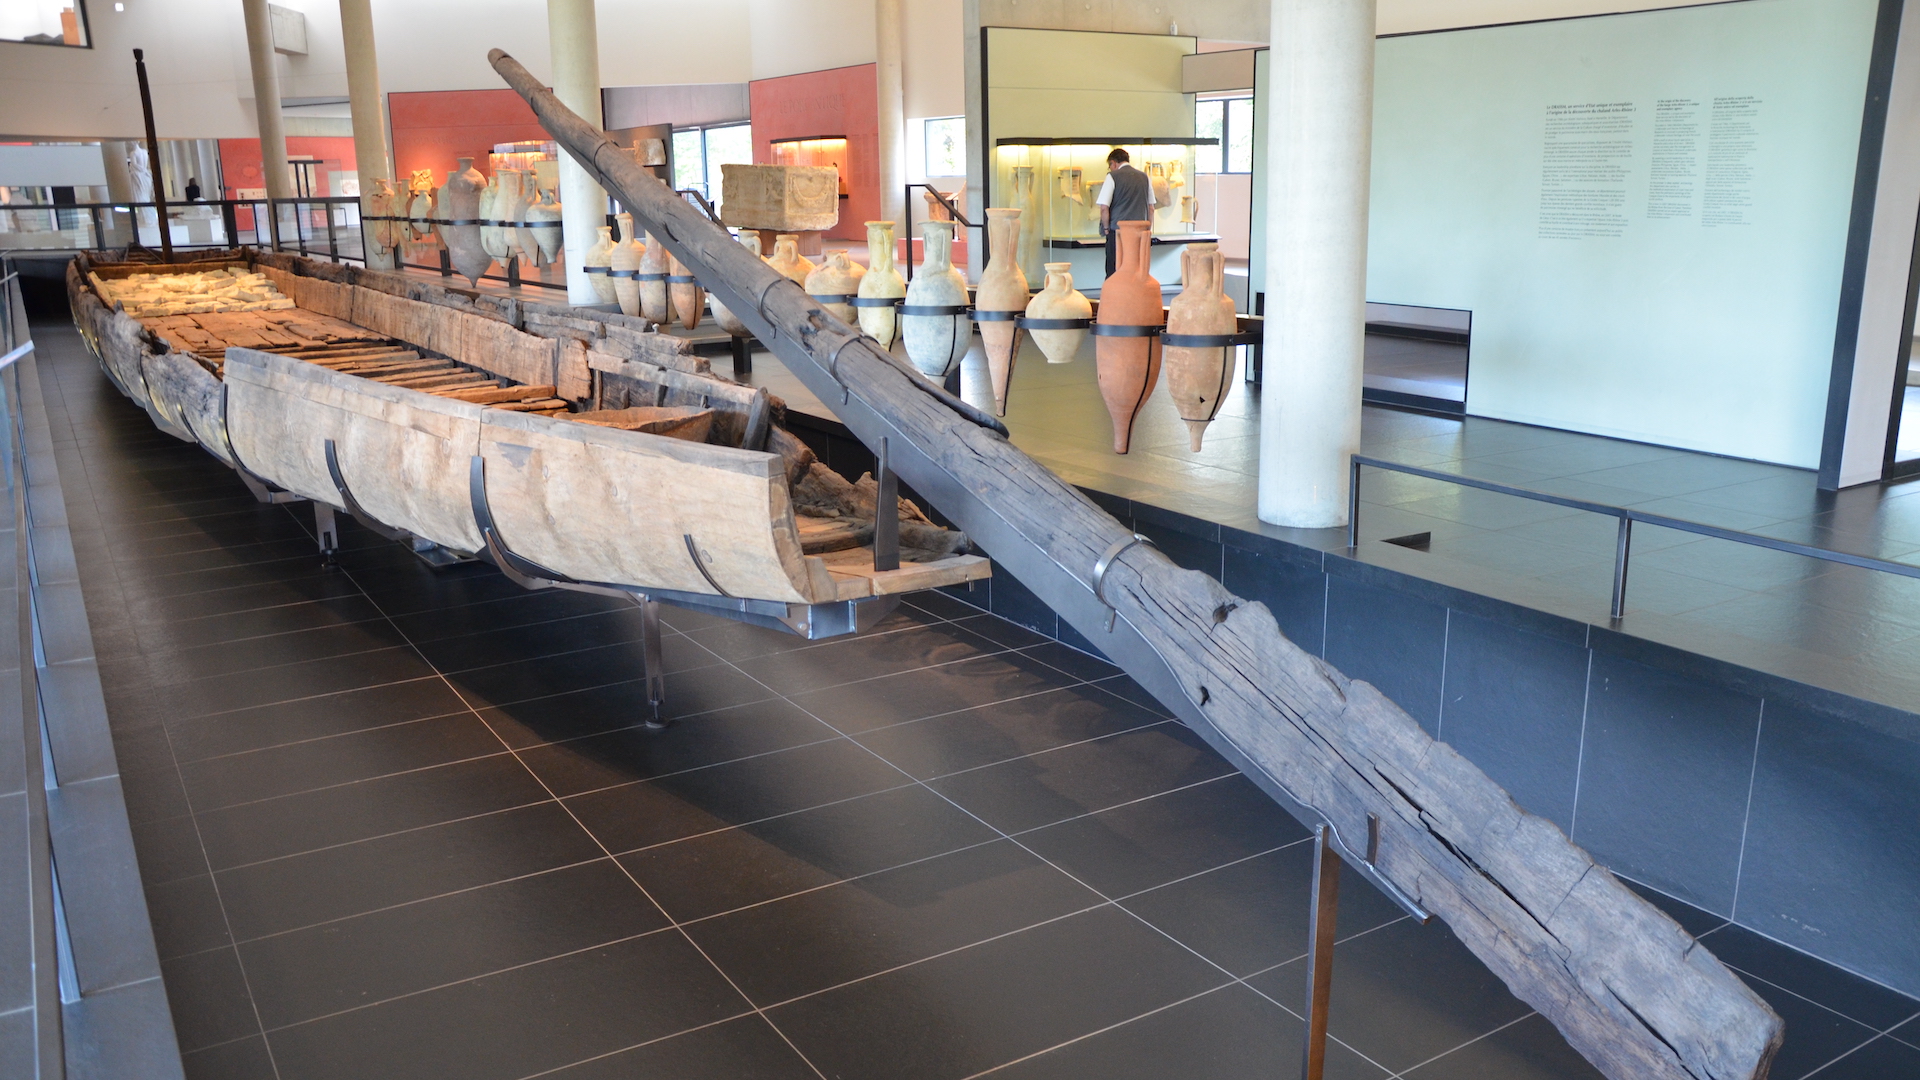 The Arles Rhone 3 ship on display in a museum